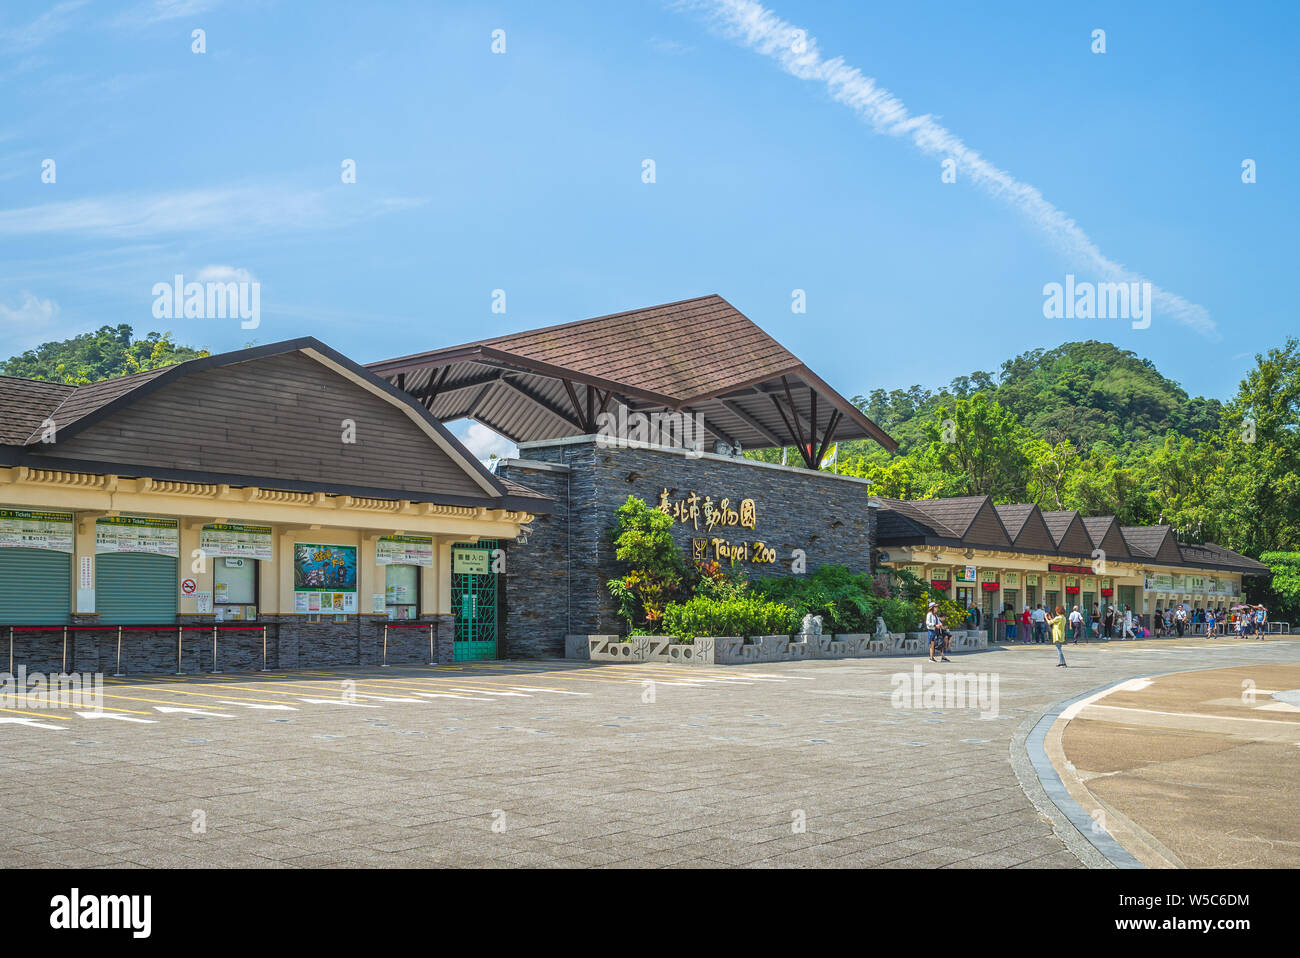 Taipei, Taiwan - July 26, 2019: Taipei Zoo, alson known as Muzha Zoo, the most famous zoological garden in Taiwan and the largest zoo in Asia, opened Stock Photo